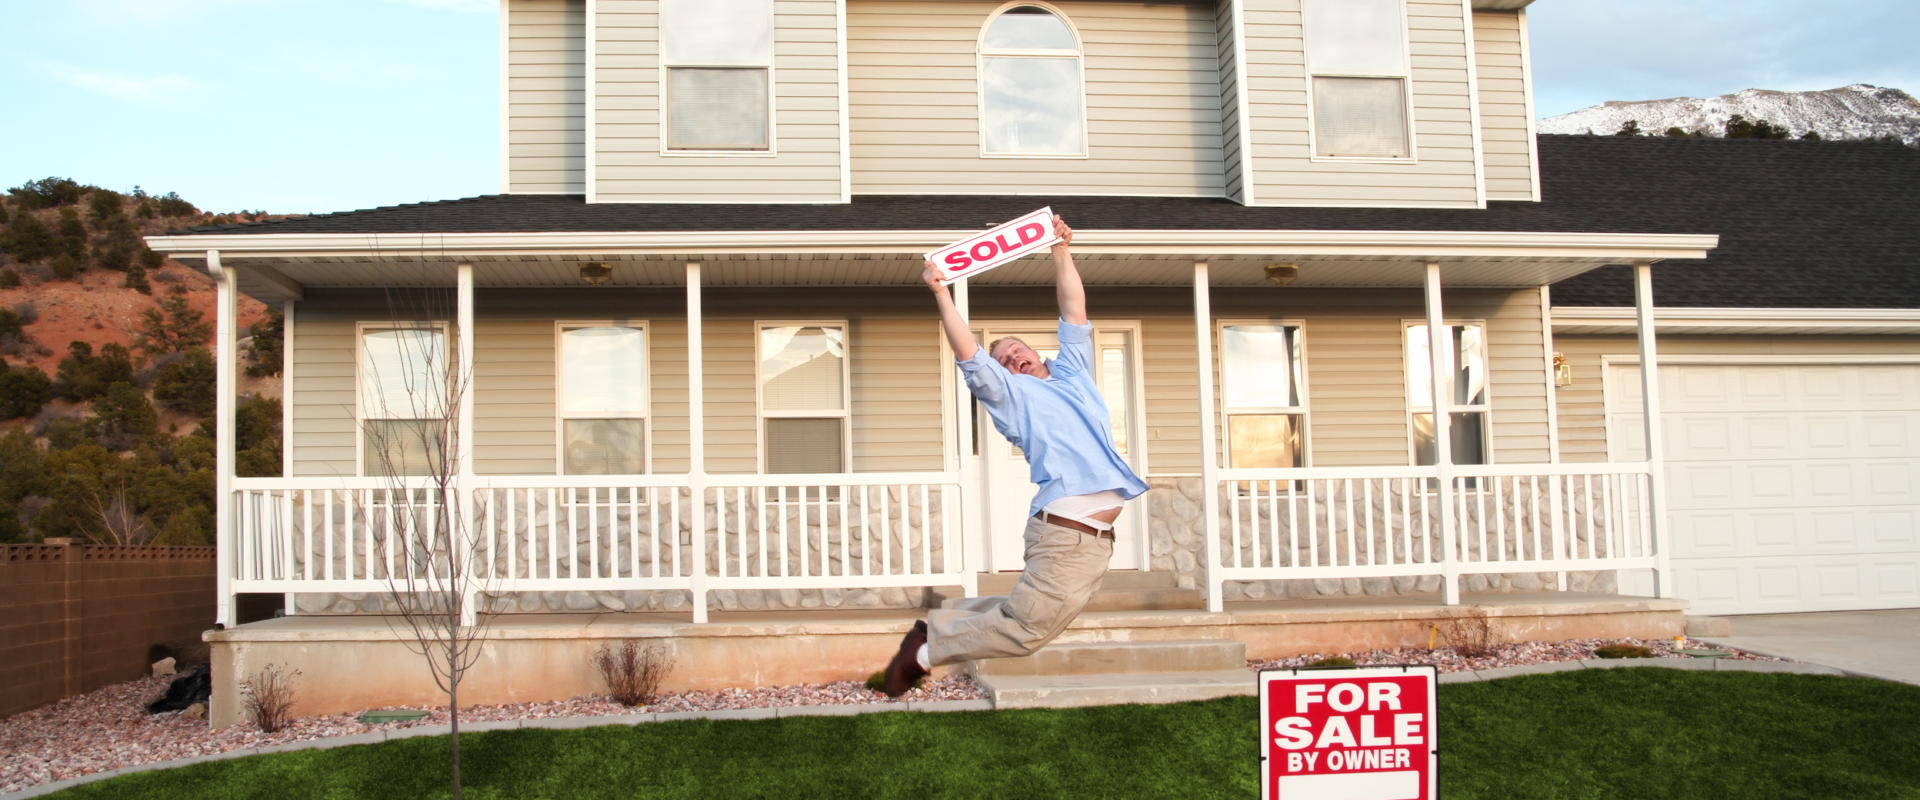 Homeowner celebrating a successful FSBO sale with a 'SOLD' sign in front of a Toledo suburban house